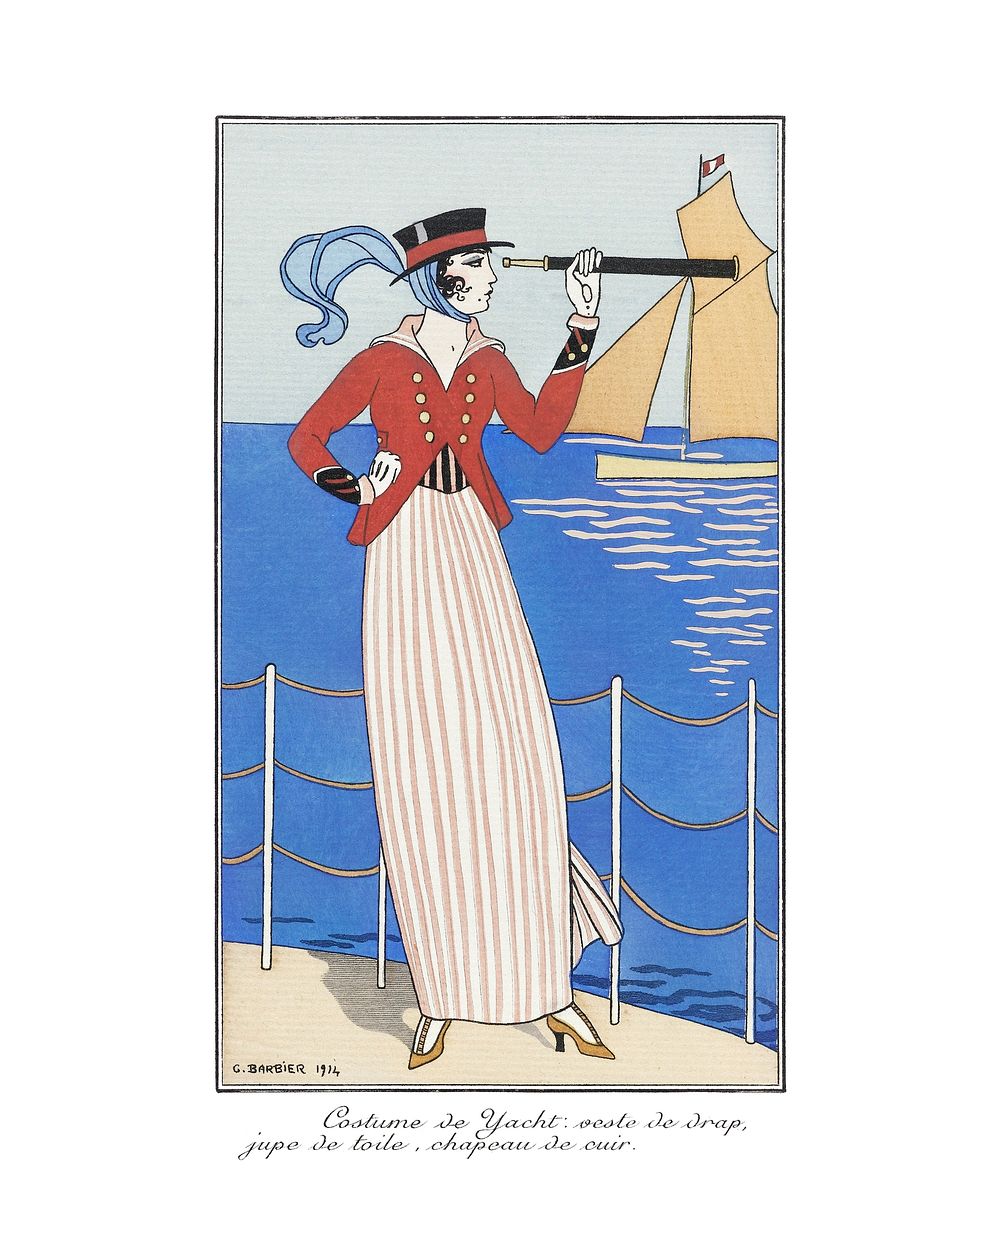 Flapper woman art poster, art deco fashion illustration remix from the artwork of George Barbier